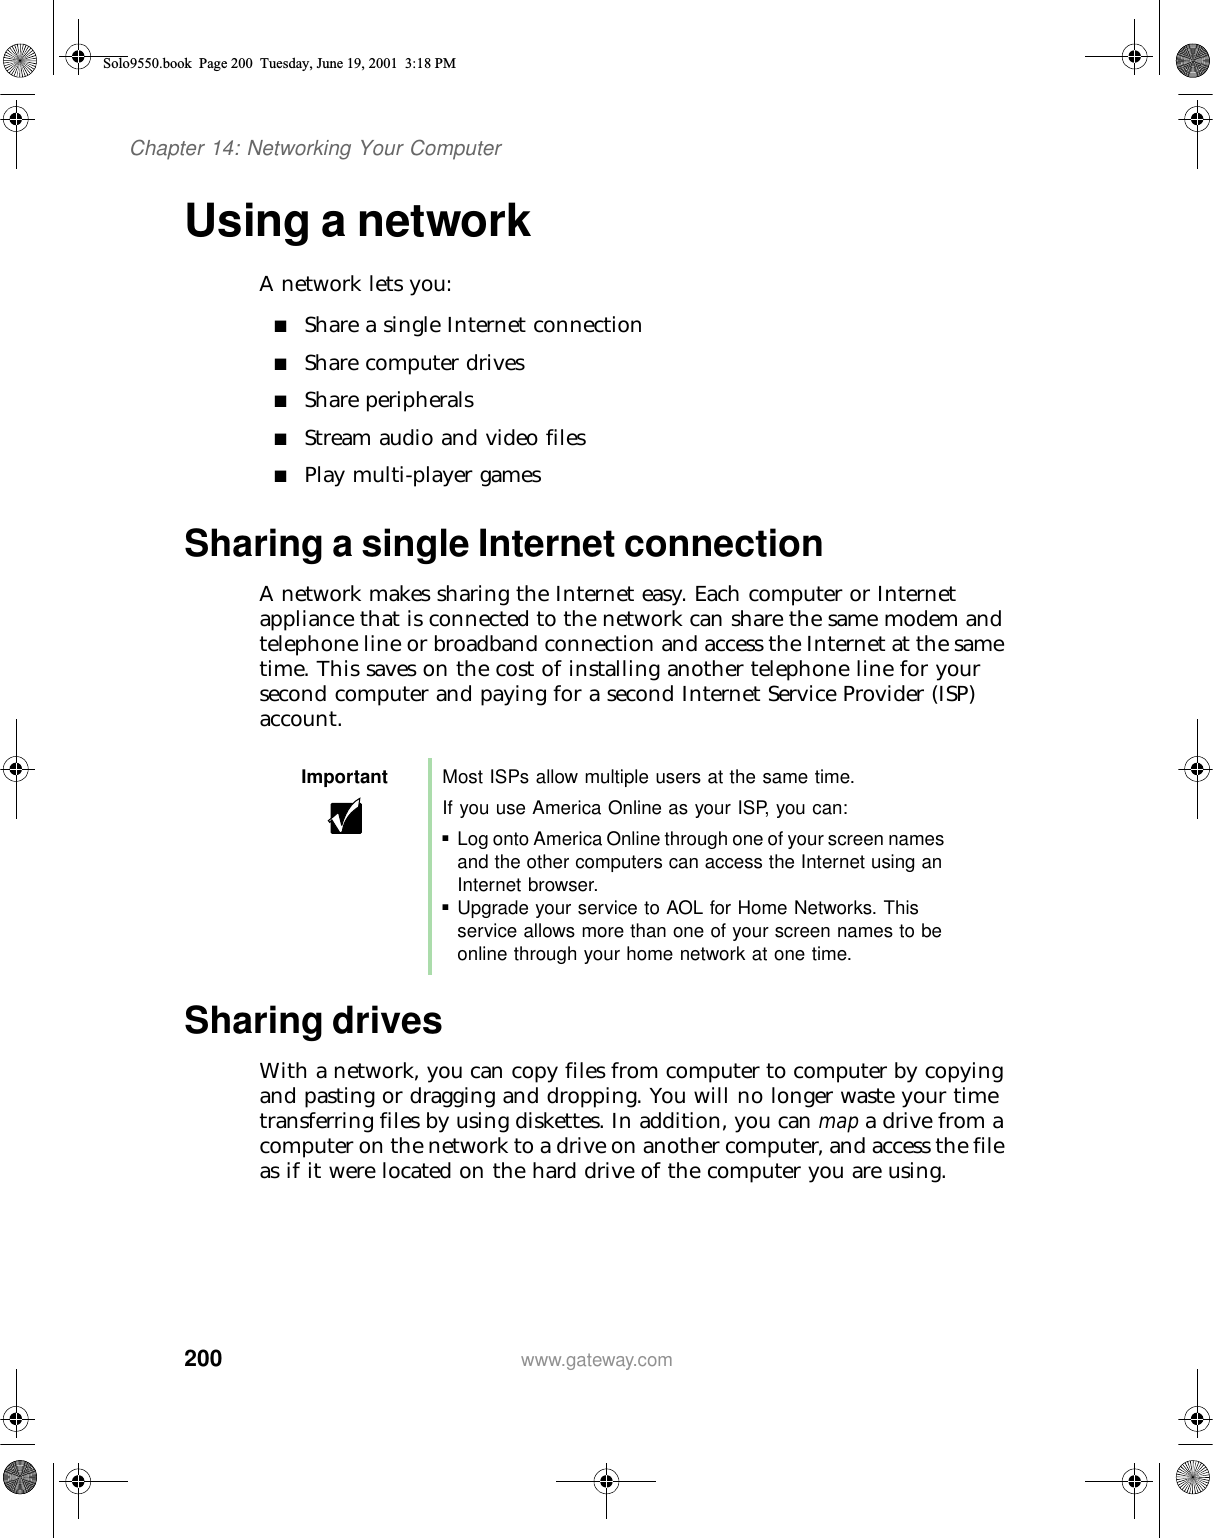 200Chapter 14: Networking Your Computerwww.gateway.comUsing a networkA network lets you:■Share a single Internet connection■Share computer drives■Share peripherals■Stream audio and video files■Play multi-player gamesSharing a single Internet connectionA network makes sharing the Internet easy. Each computer or Internet appliance that is connected to the network can share the same modem and telephone line or broadband connection and access the Internet at the same time. This saves on the cost of installing another telephone line for your second computer and paying for a second Internet Service Provider (ISP) account.Sharing drivesWith a network, you can copy files from computer to computer by copying and pasting or dragging and dropping. You will no longer waste your time transferring files by using diskettes. In addition, you can map a drive from a computer on the network to a drive on another computer, and access the file as if it were located on the hard drive of the computer you are using.Important Most ISPs allow multiple users at the same time.If you use America Online as your ISP, you can:■Log onto America Online through one of your screen names and the other computers can access the Internet using an Internet browser.■Upgrade your service to AOL for Home Networks. This service allows more than one of your screen names to be online through your home network at one time.Solo9550.book Page 200 Tuesday, June 19, 2001 3:18 PM